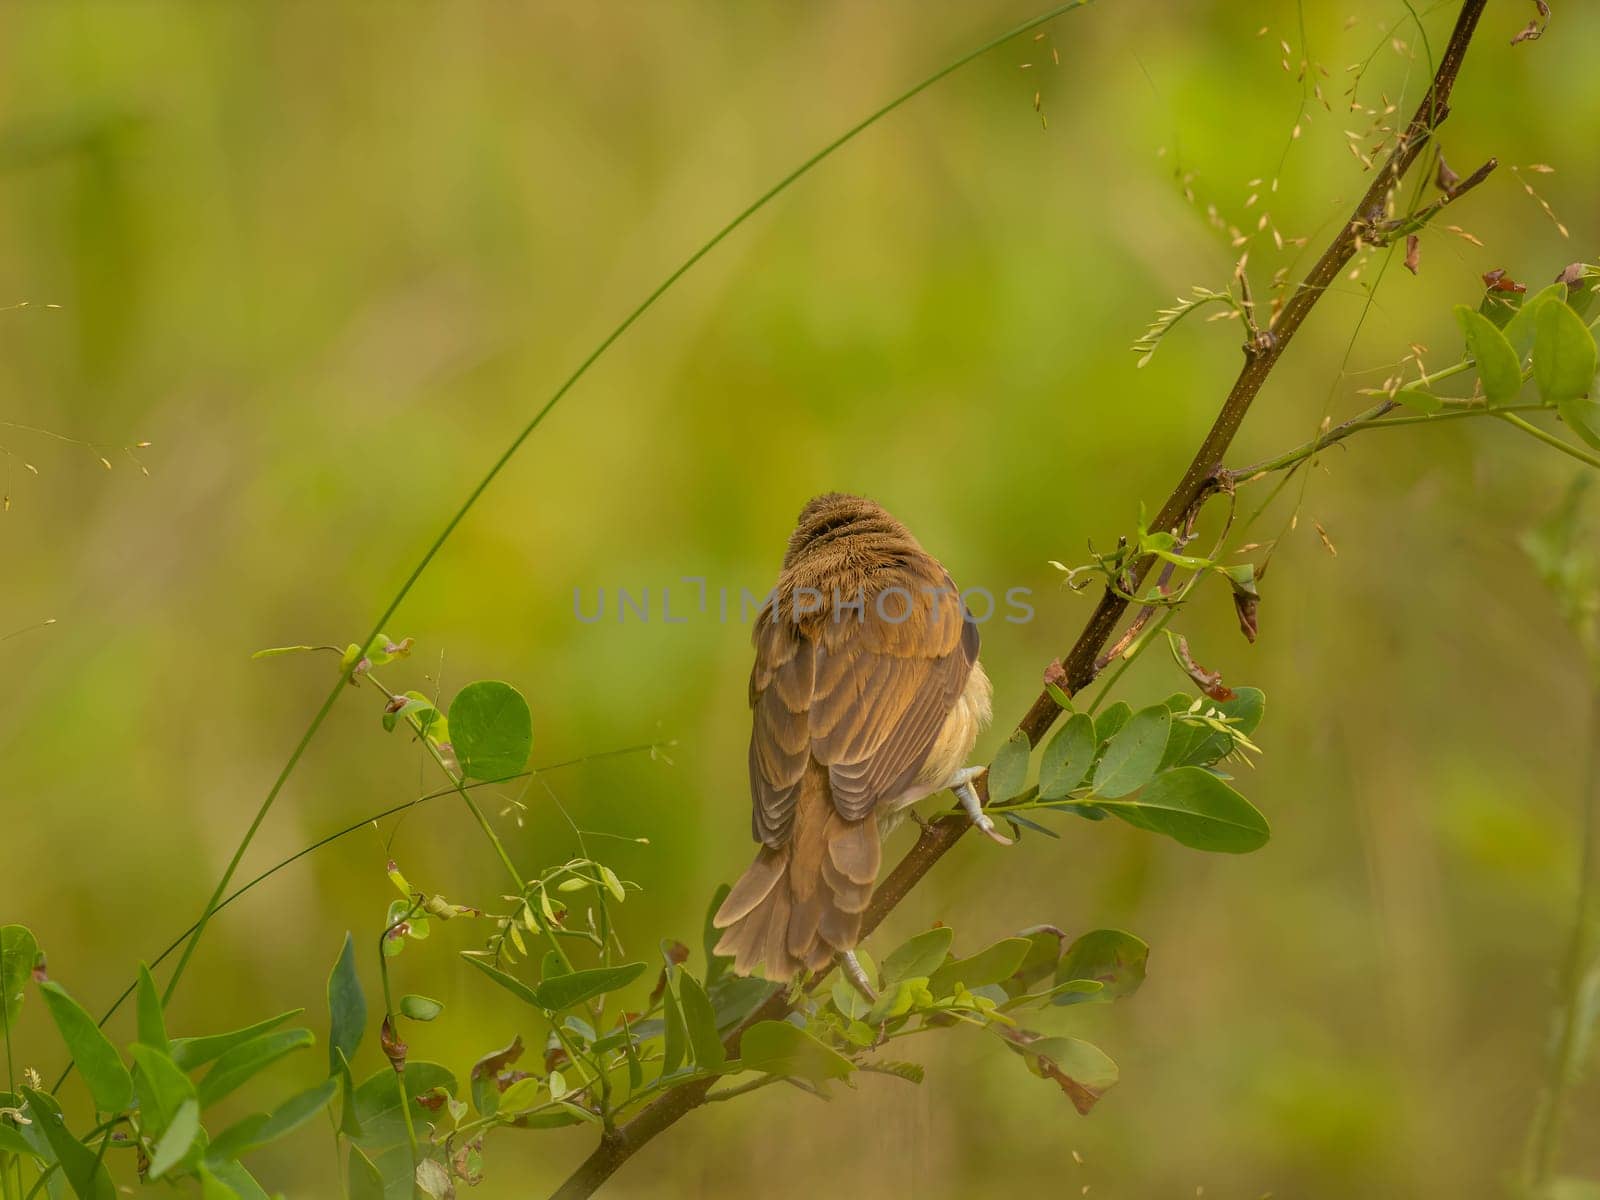 A Great Reed Warbler perched on a tree branch, blending in with the lush green background.A Great Reed Warbler perched on a tree branch, blending in with the lush green background.